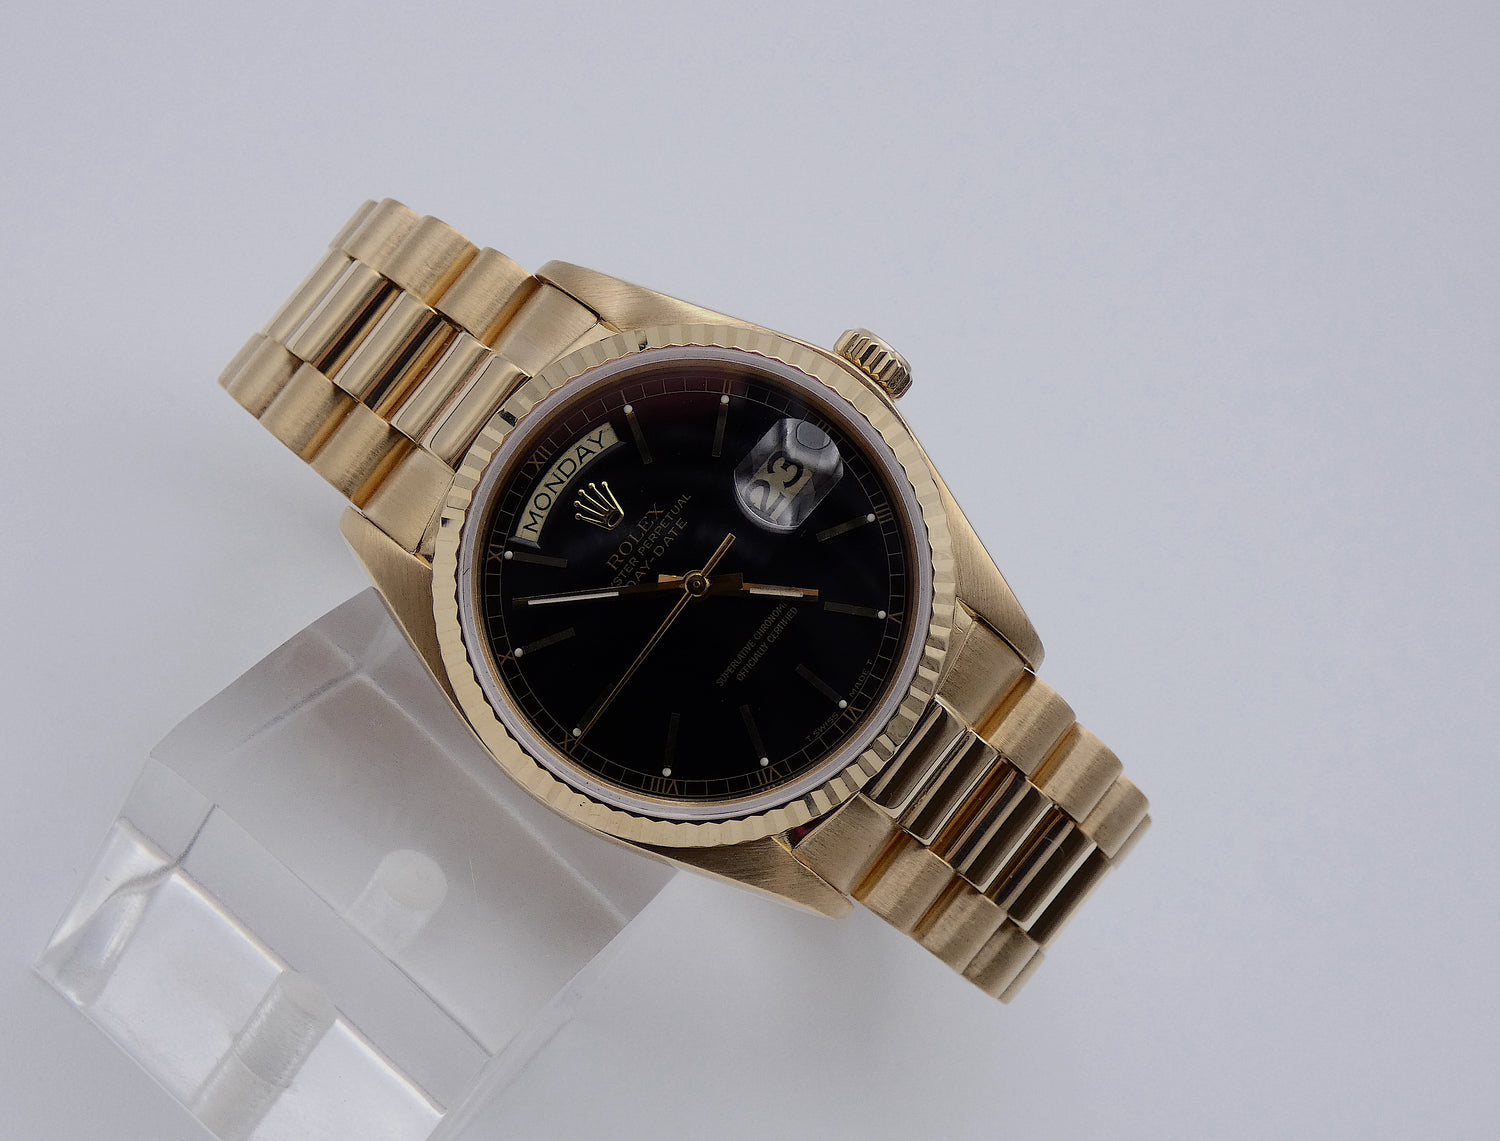 SOLD Rolex Day-Date 36 / Very nice / Black / 1979